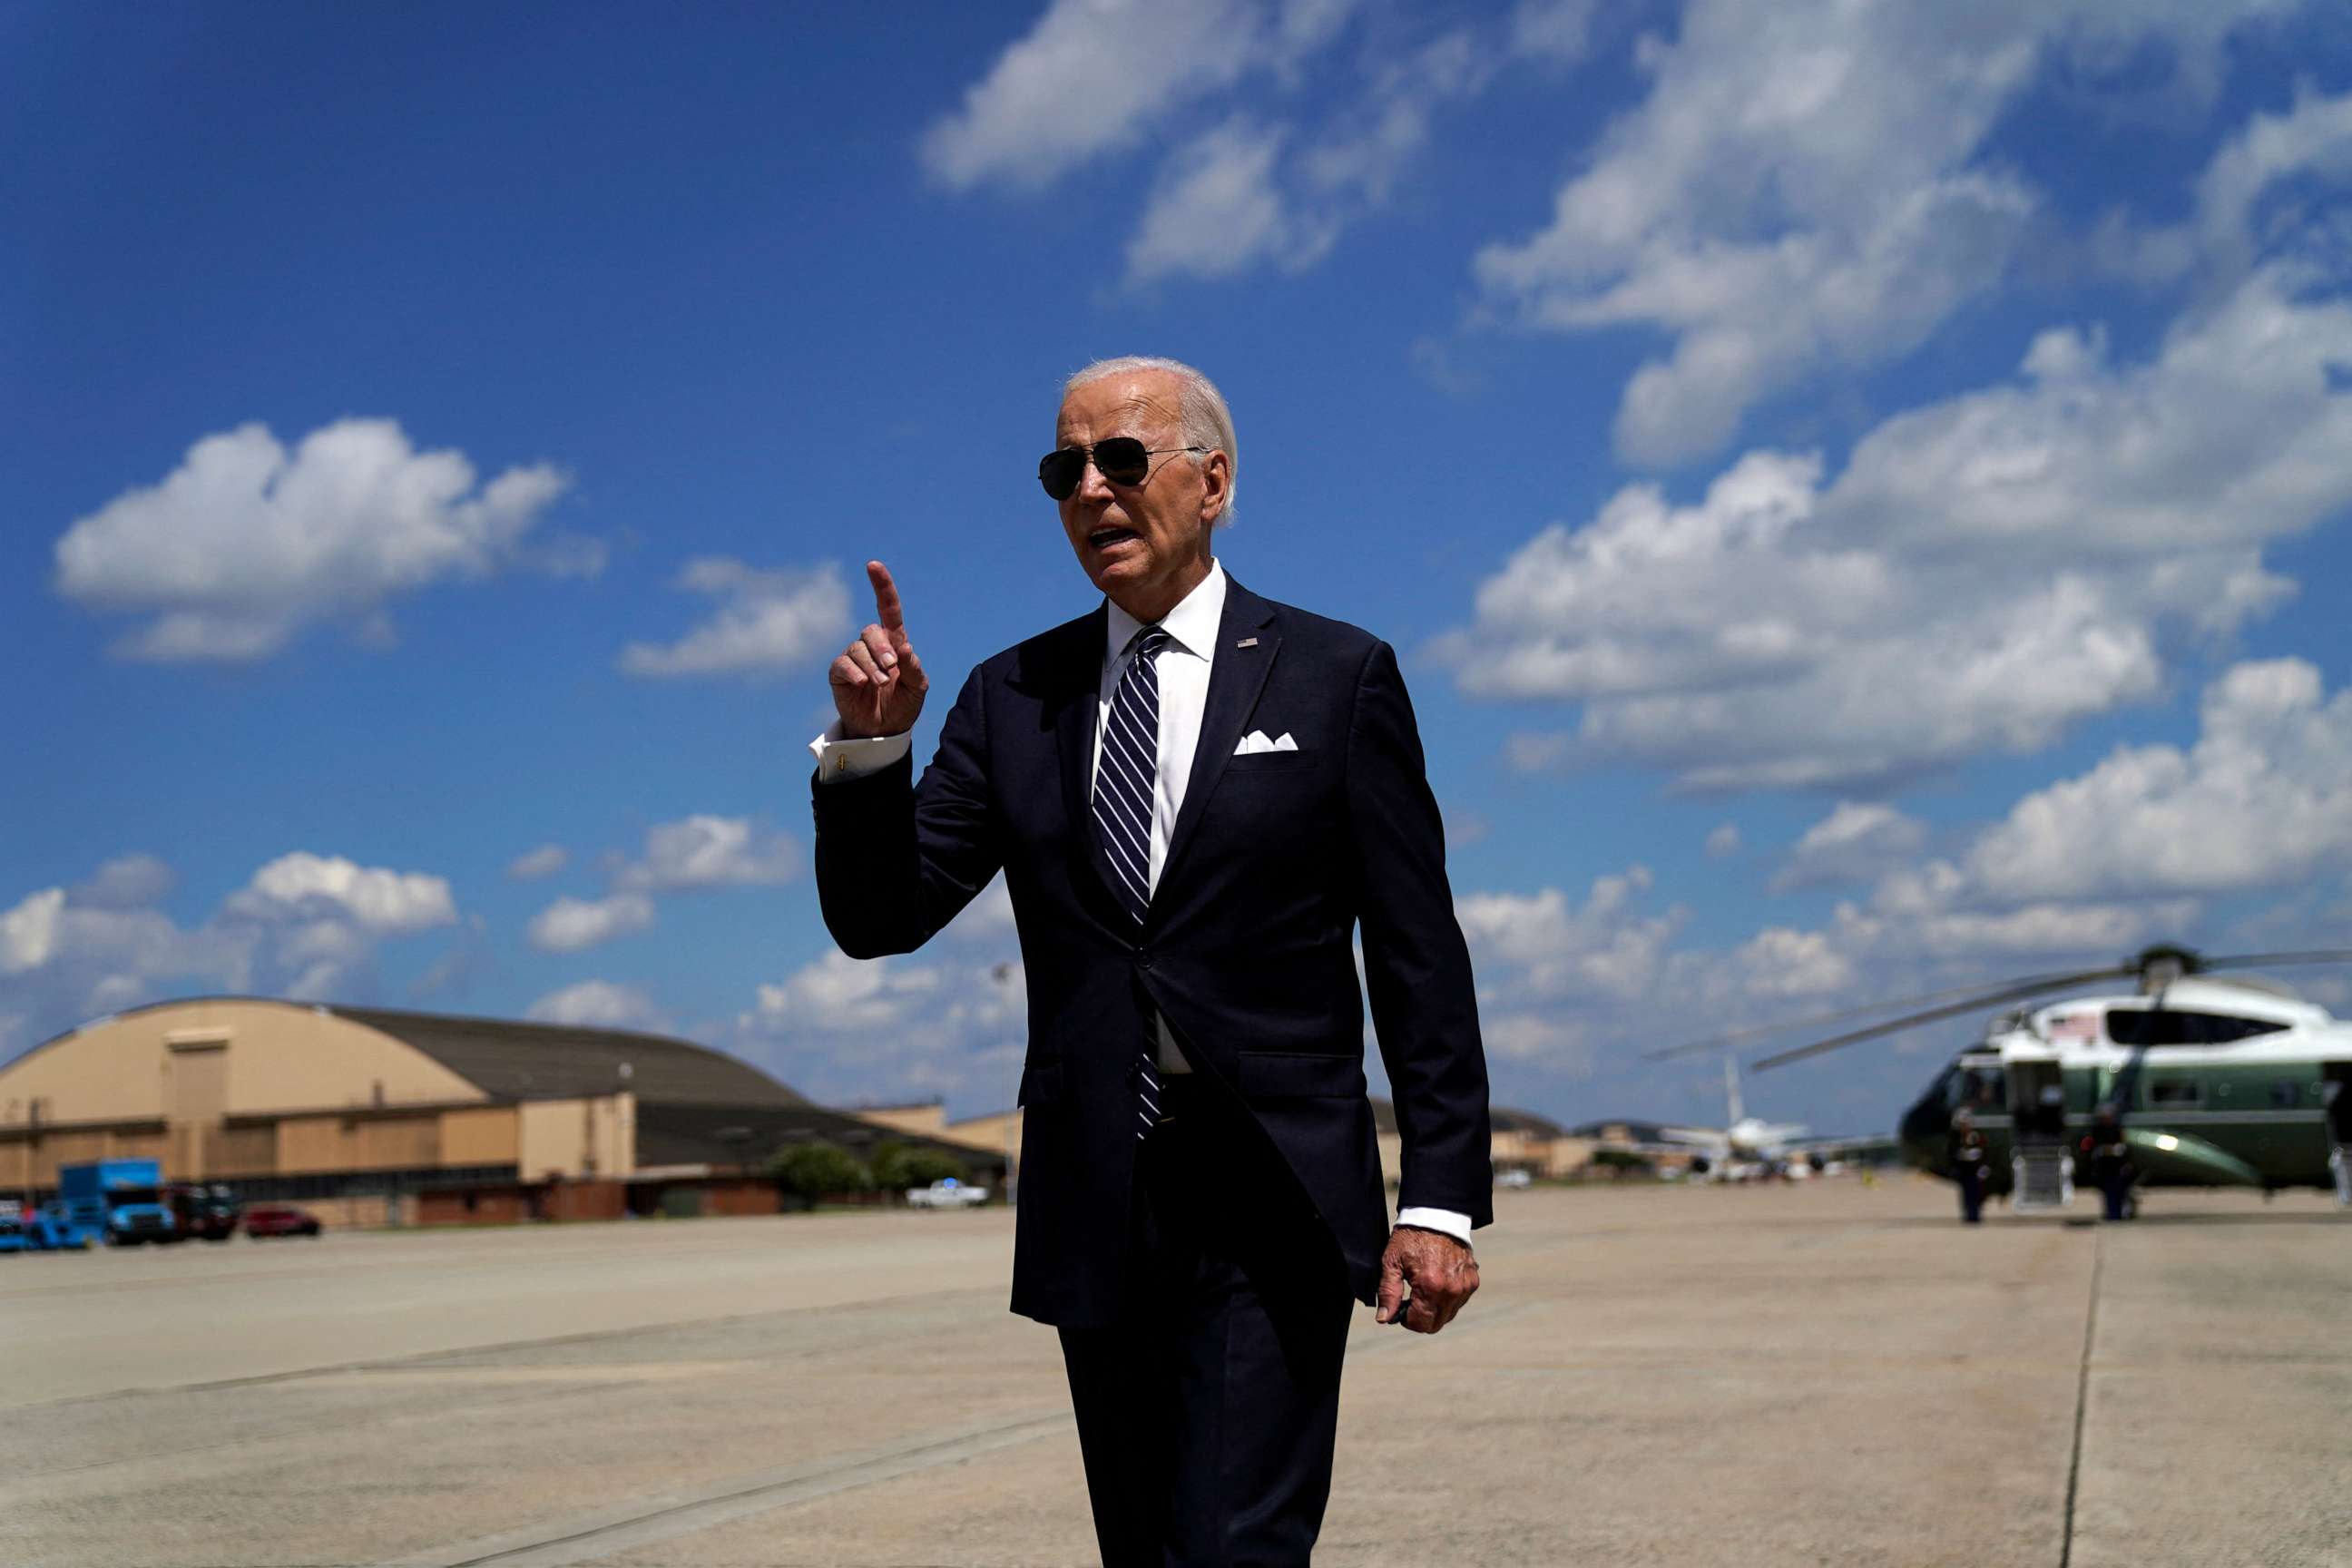 PHOTO: President Joe Biden speaks to the press before boarding Air Force One at Joint Base Andrews in Maryland on August 17, 2023, as he departs for Camp David with a stop in Scranton, Pennsylvania.